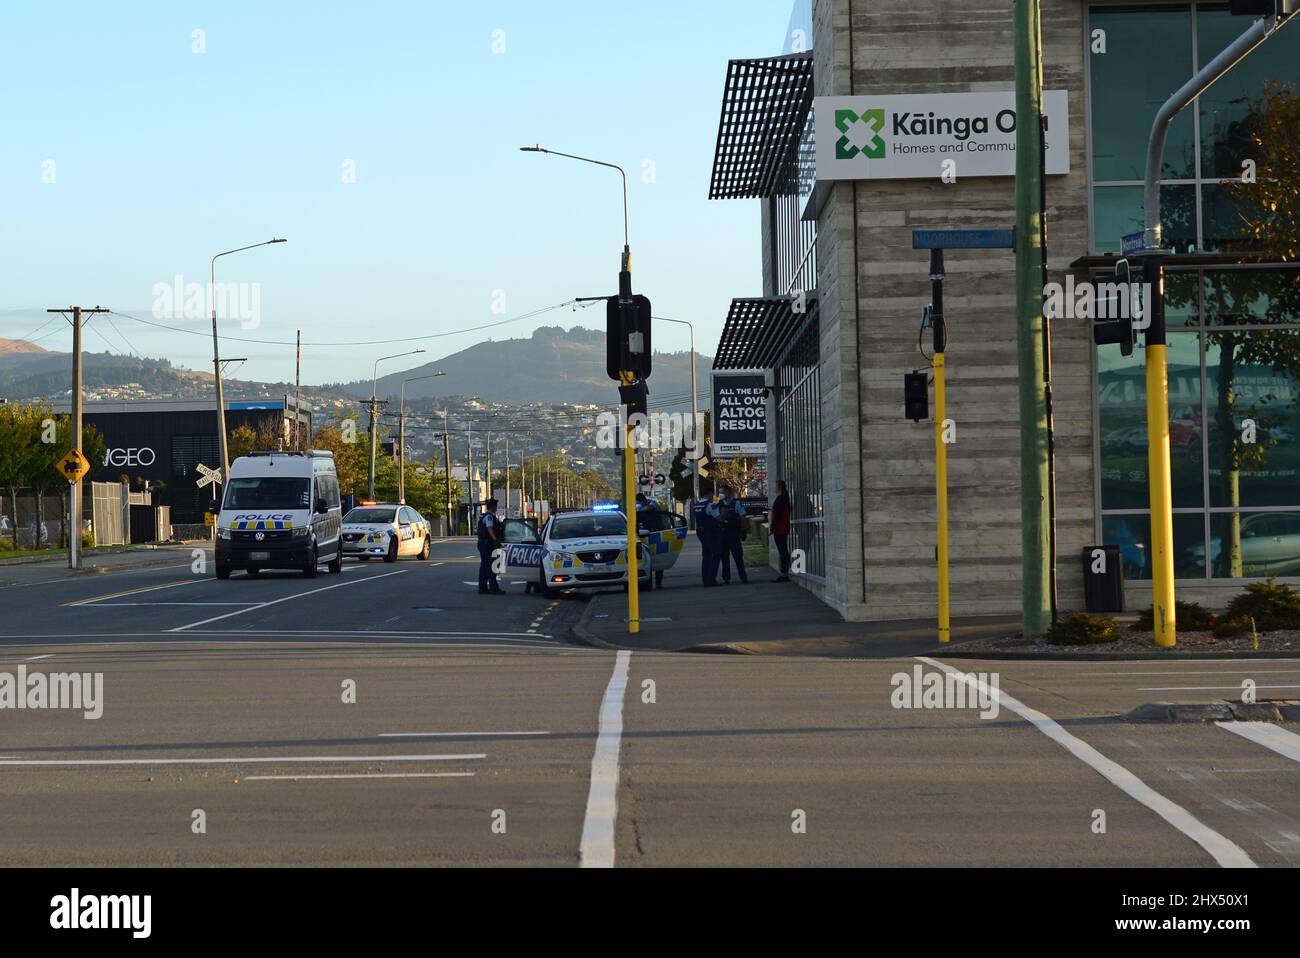 Christchurch, New Zealand, March 1, 2021: Police attend to their business in Christchurch city. A member of the public has their face pixelated while being questioned. Number plataes are pixelated. Stock Photo